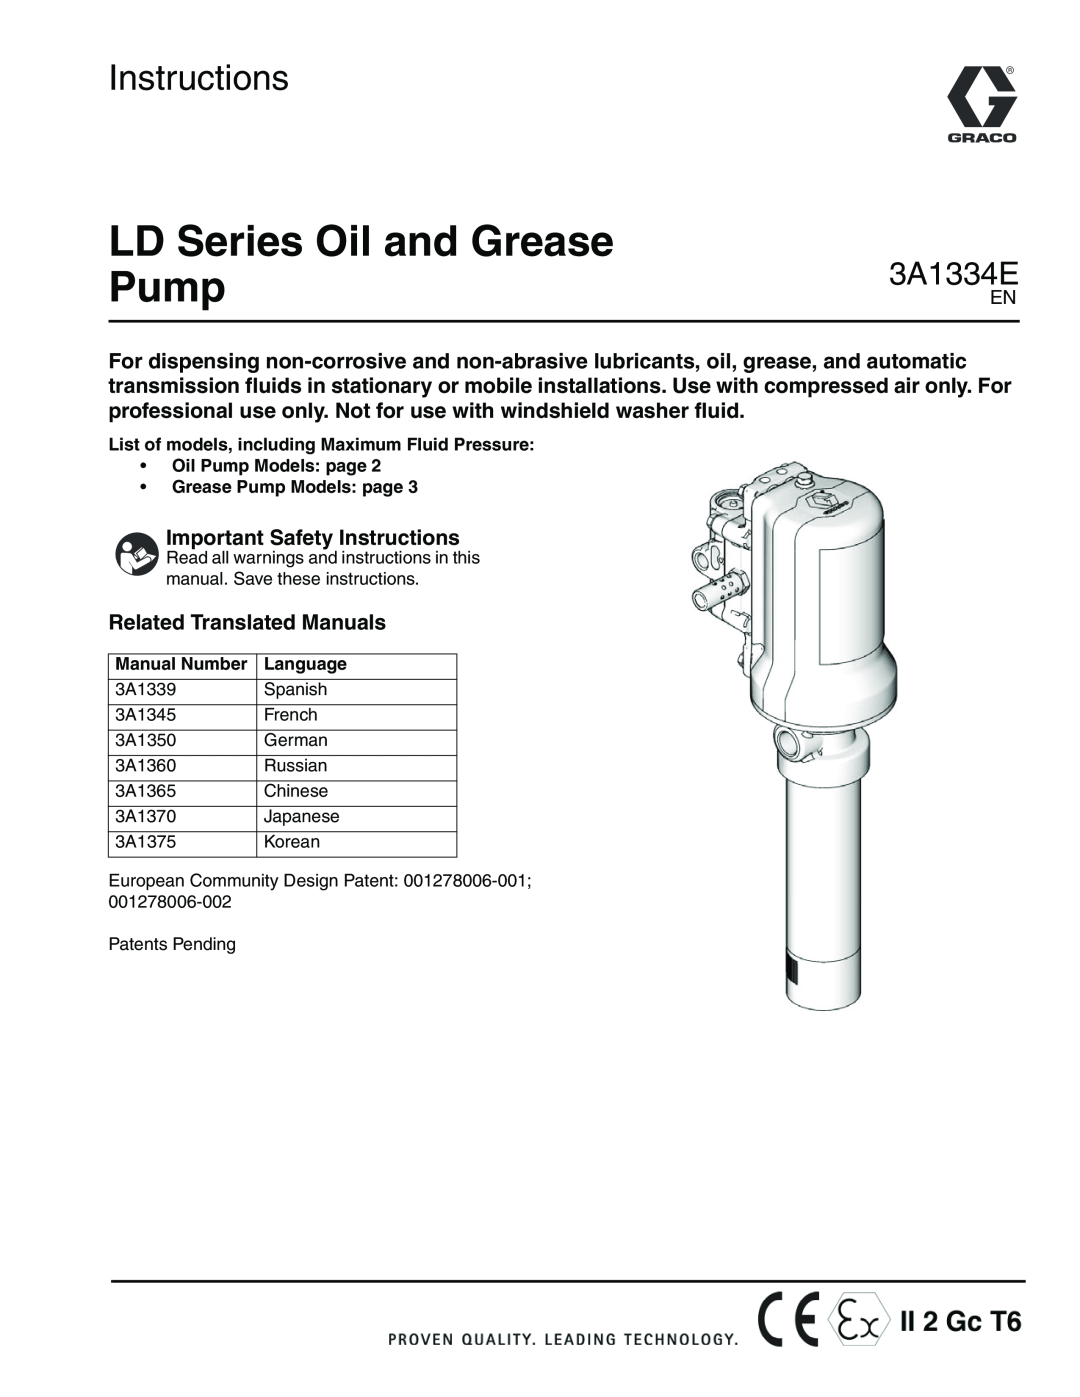 Graco 3A1334E important safety instructions LD Series Oil and Grease, Pump, Instructions 